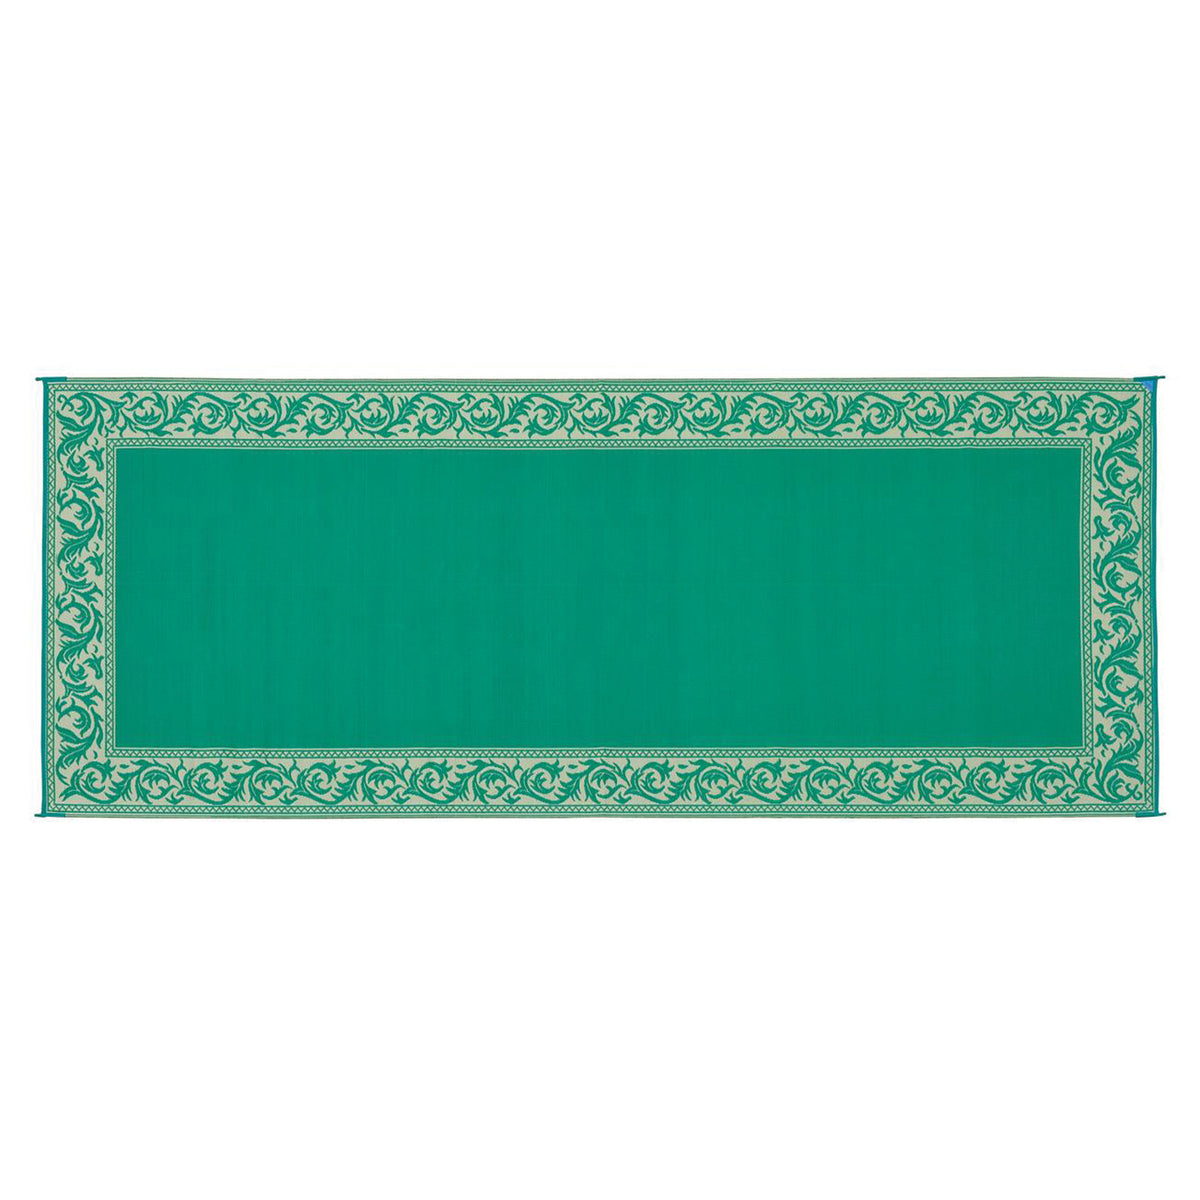 Ming's Mark RC4 Stylish Camping Reversible Classical Patio Mat - 8' x 20', Green/Beige